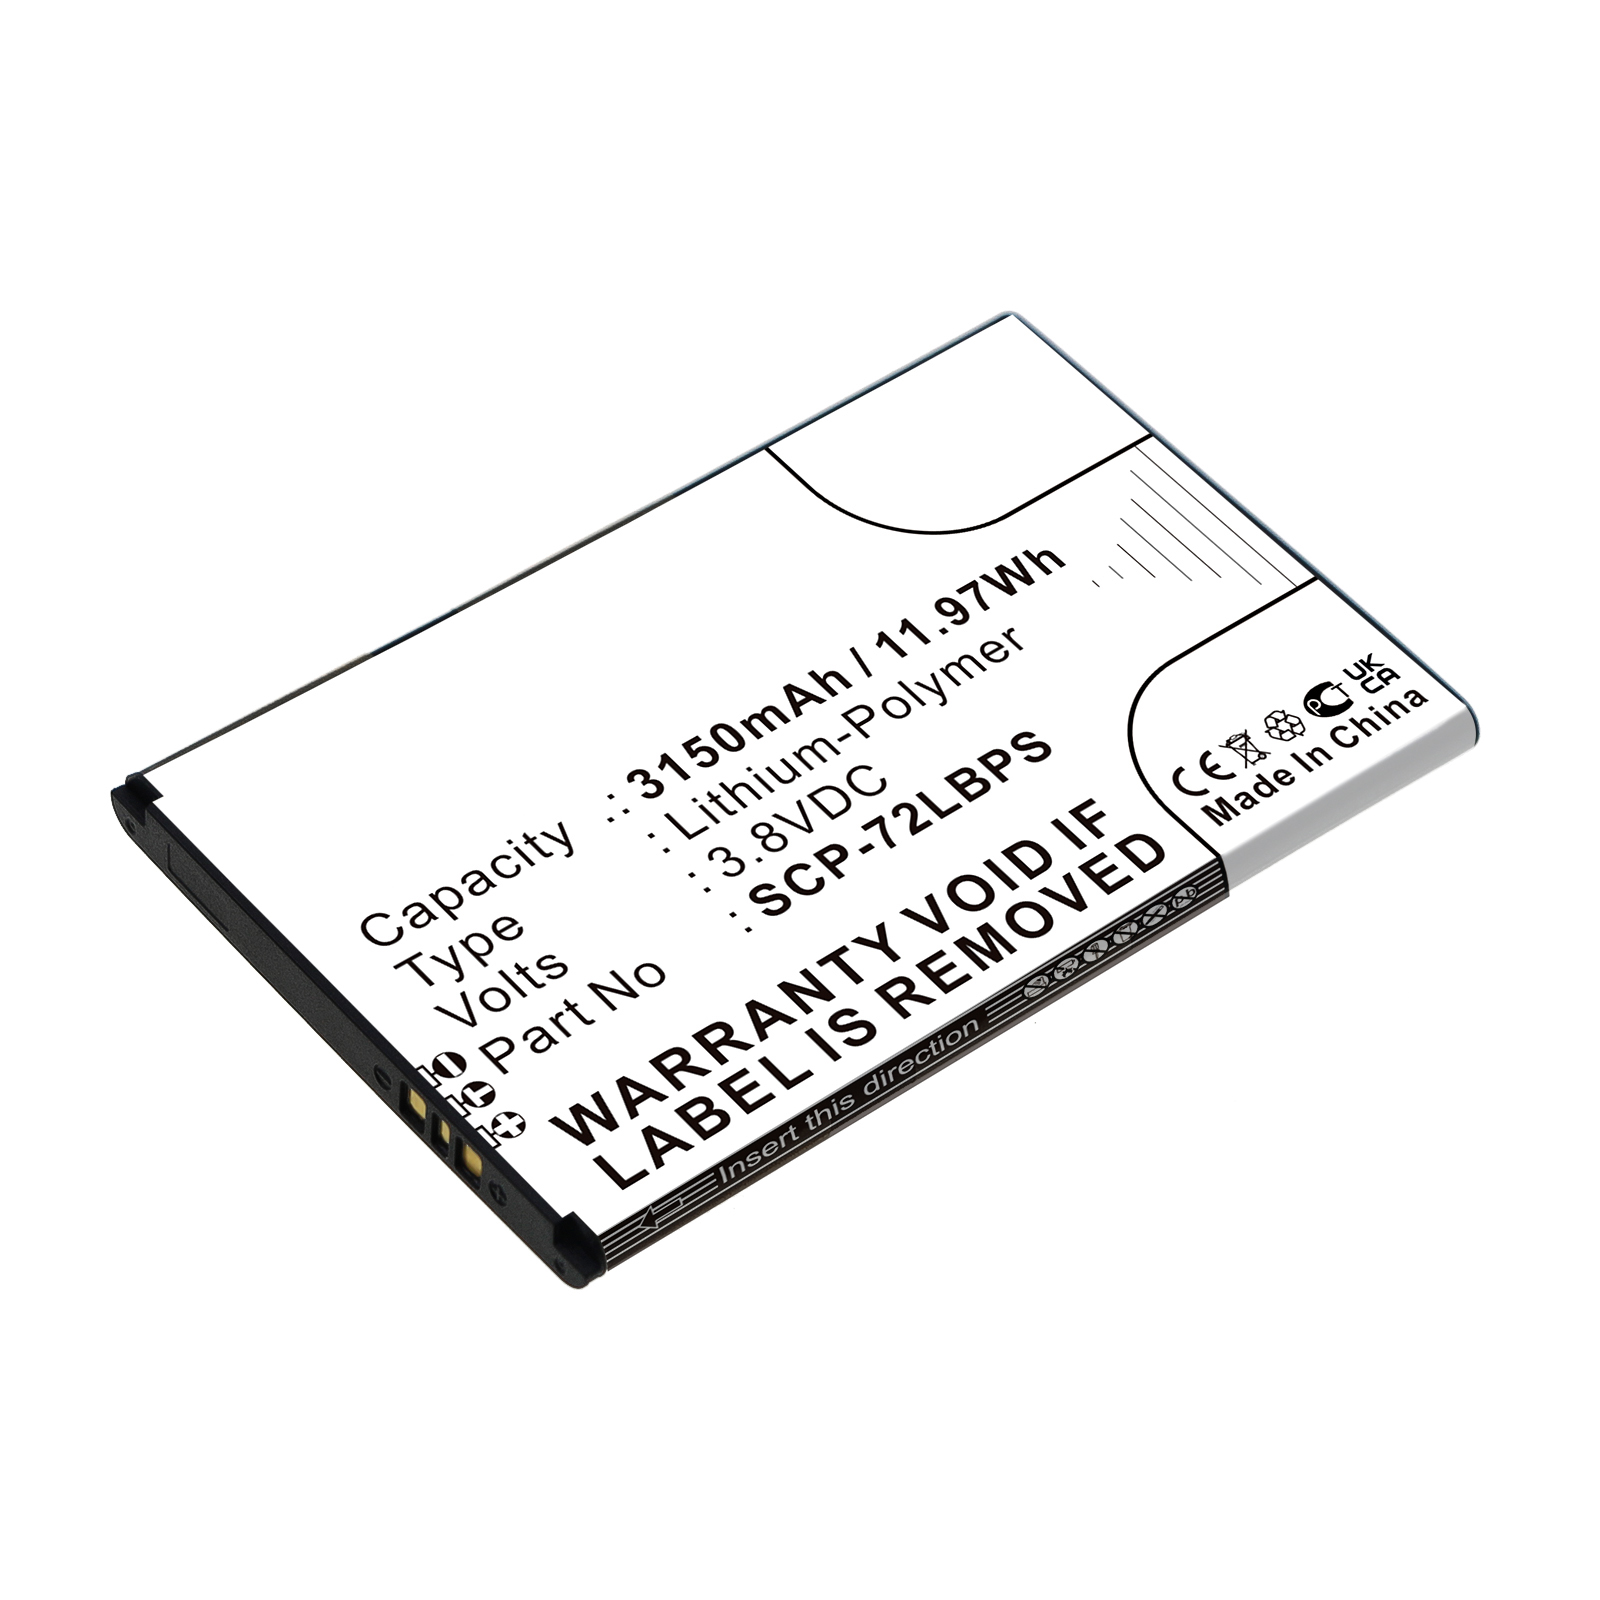 Synergy Digital Cell Phone Battery, Compatible with Kyocera SCP-72LBPS Cell Phone Battery (Li-Pol, 3.8V, 3150mAh)